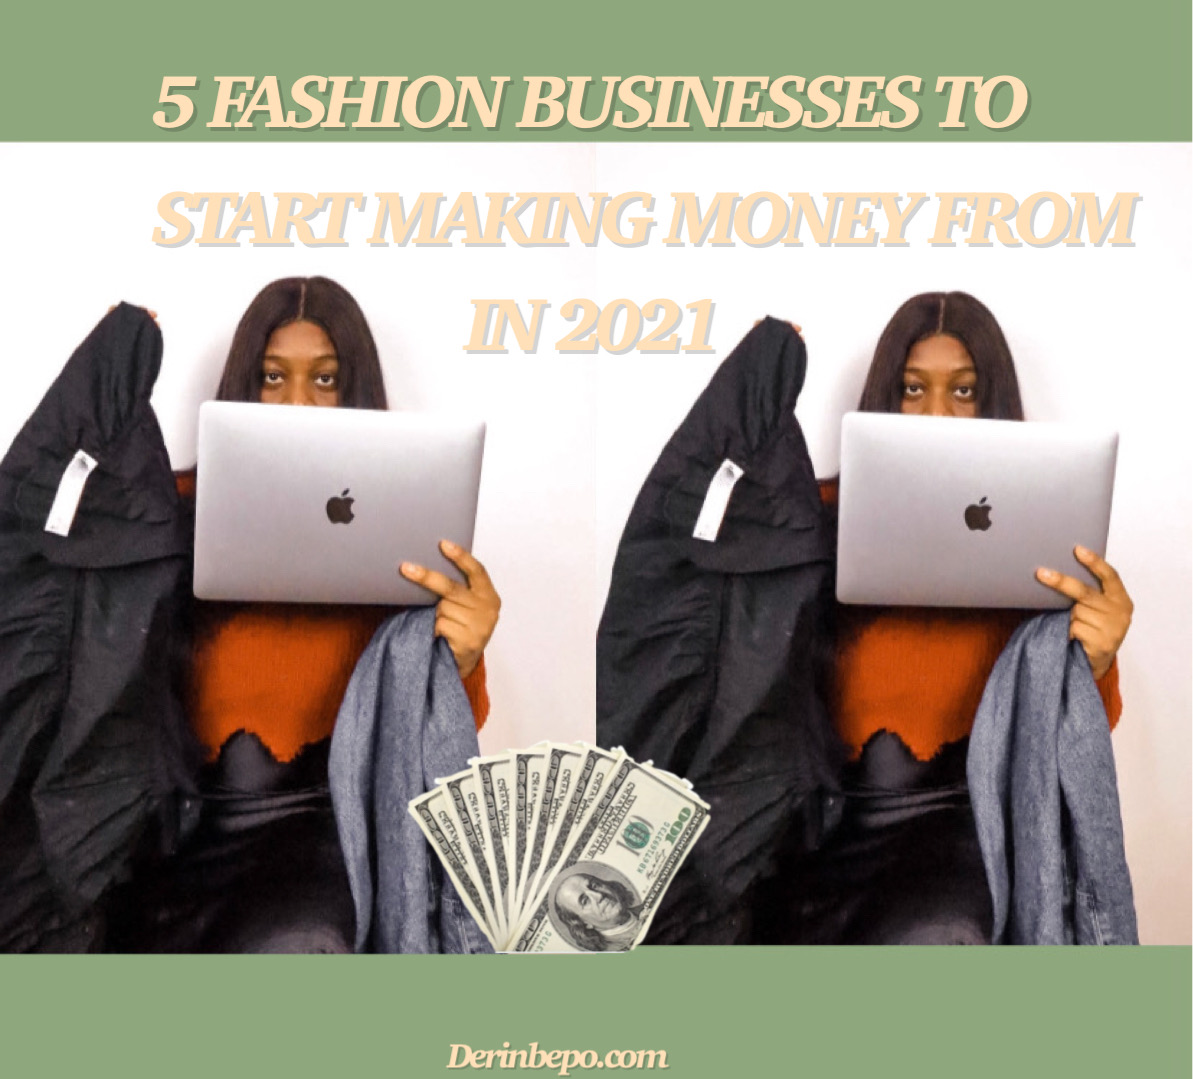 business of fashion